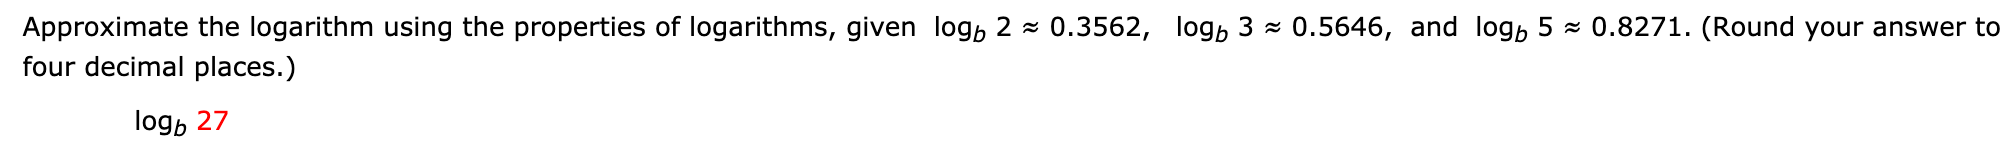 Approximate the logarithm using the properties of logarithms, given logb 2 ~ 0.3562, logb 3
four decimal places.)
0.5646, and logb 5
0.8271·(Round your answer to
log, 27
